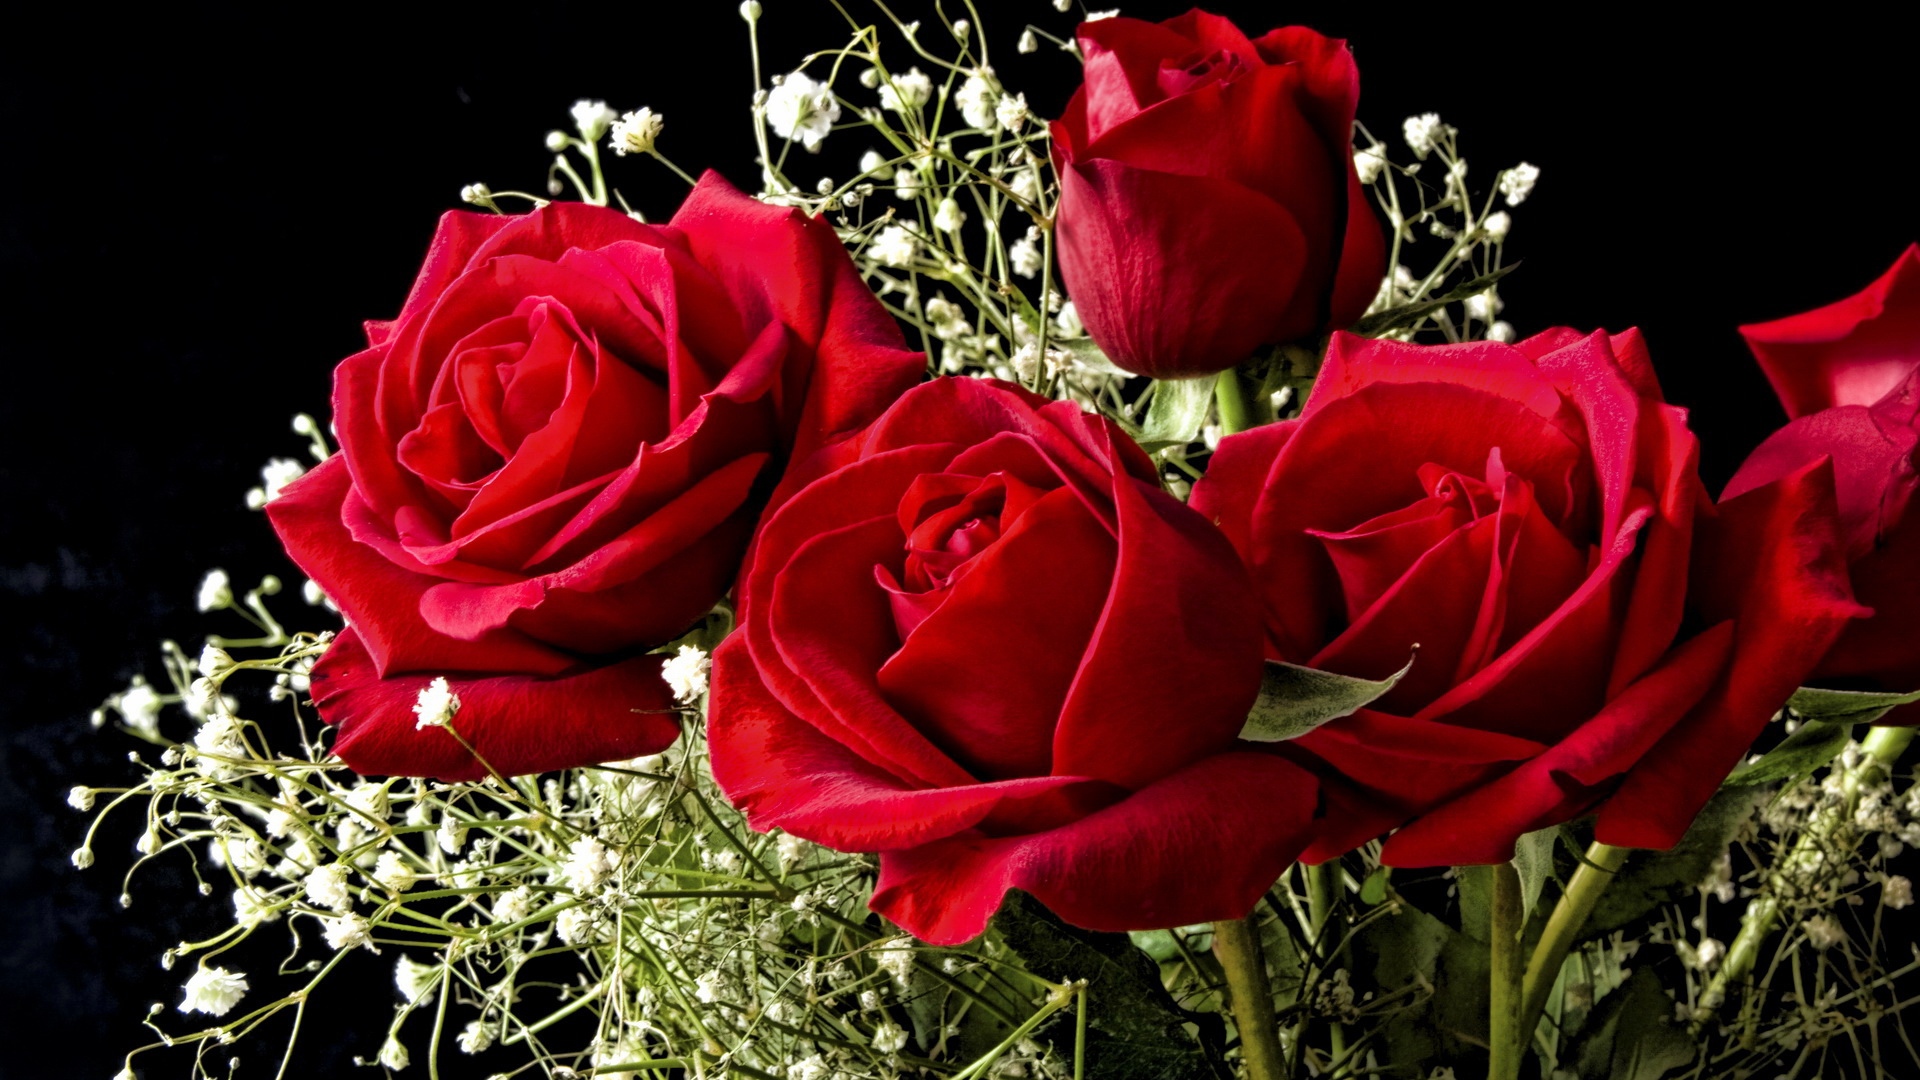 Get Inspired For Wallpaper Hd Red Rose Flower pictures - Jisoa Wallpapers